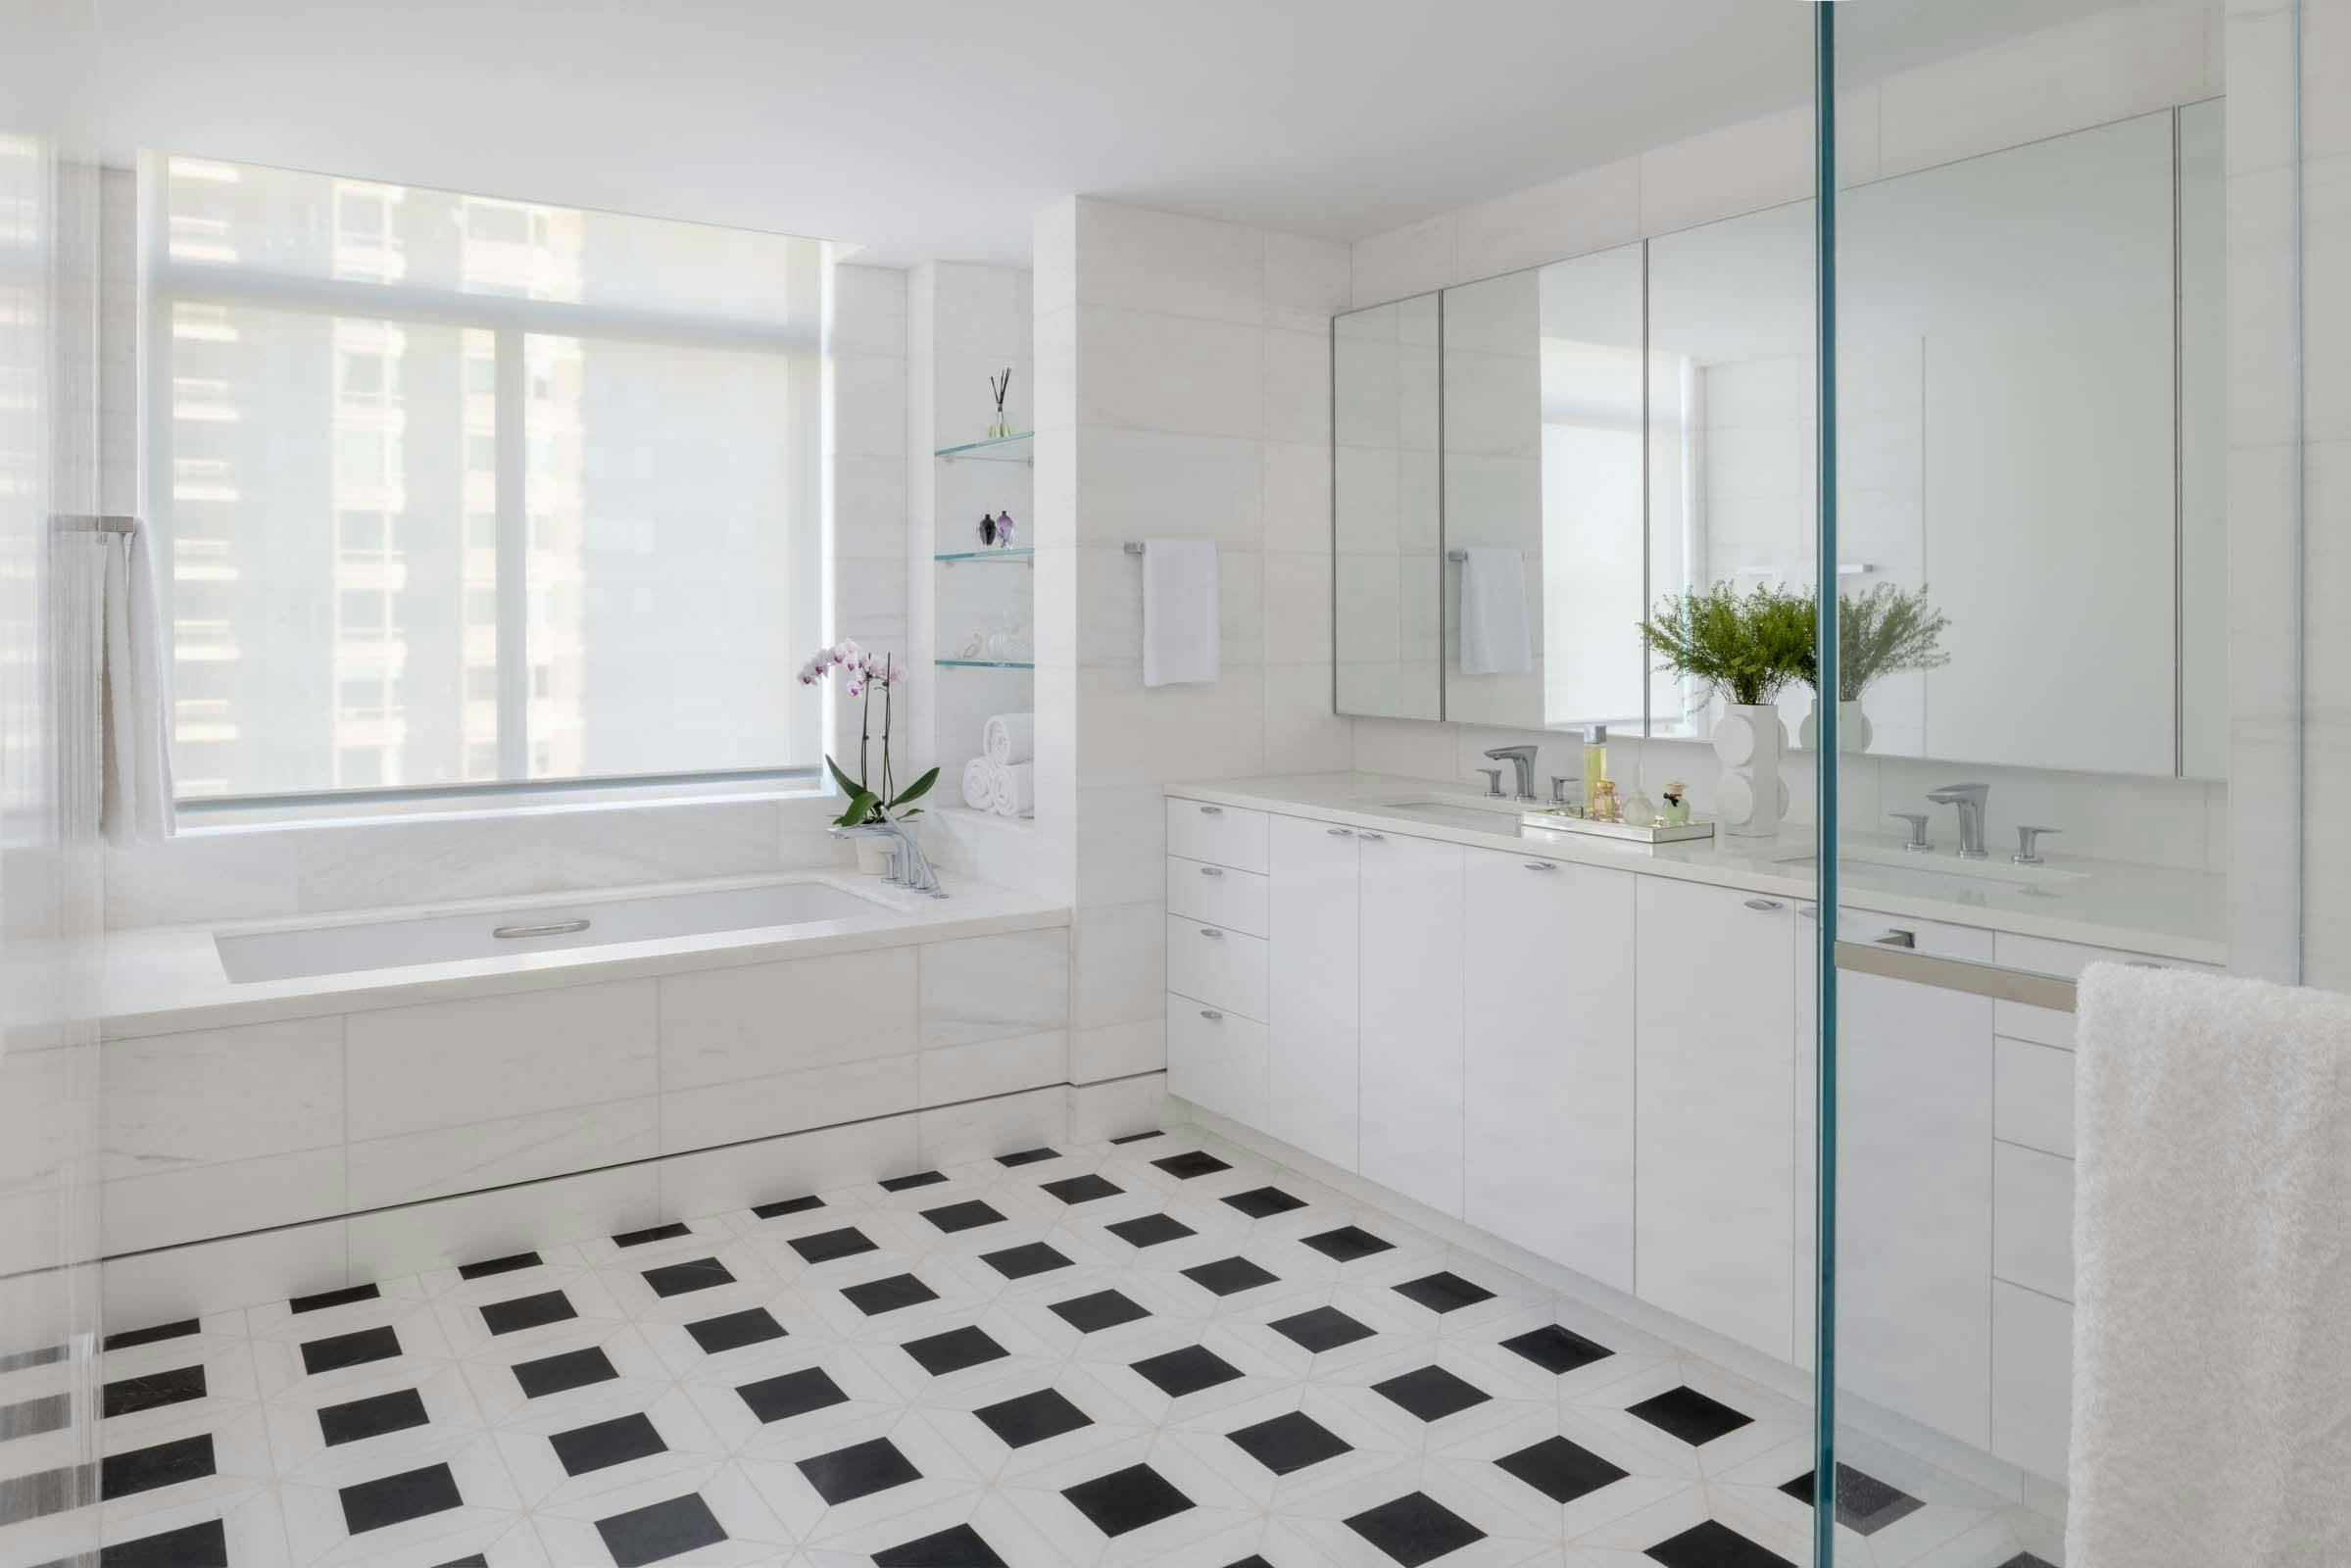 Somerset bathroom with black and white floor tile